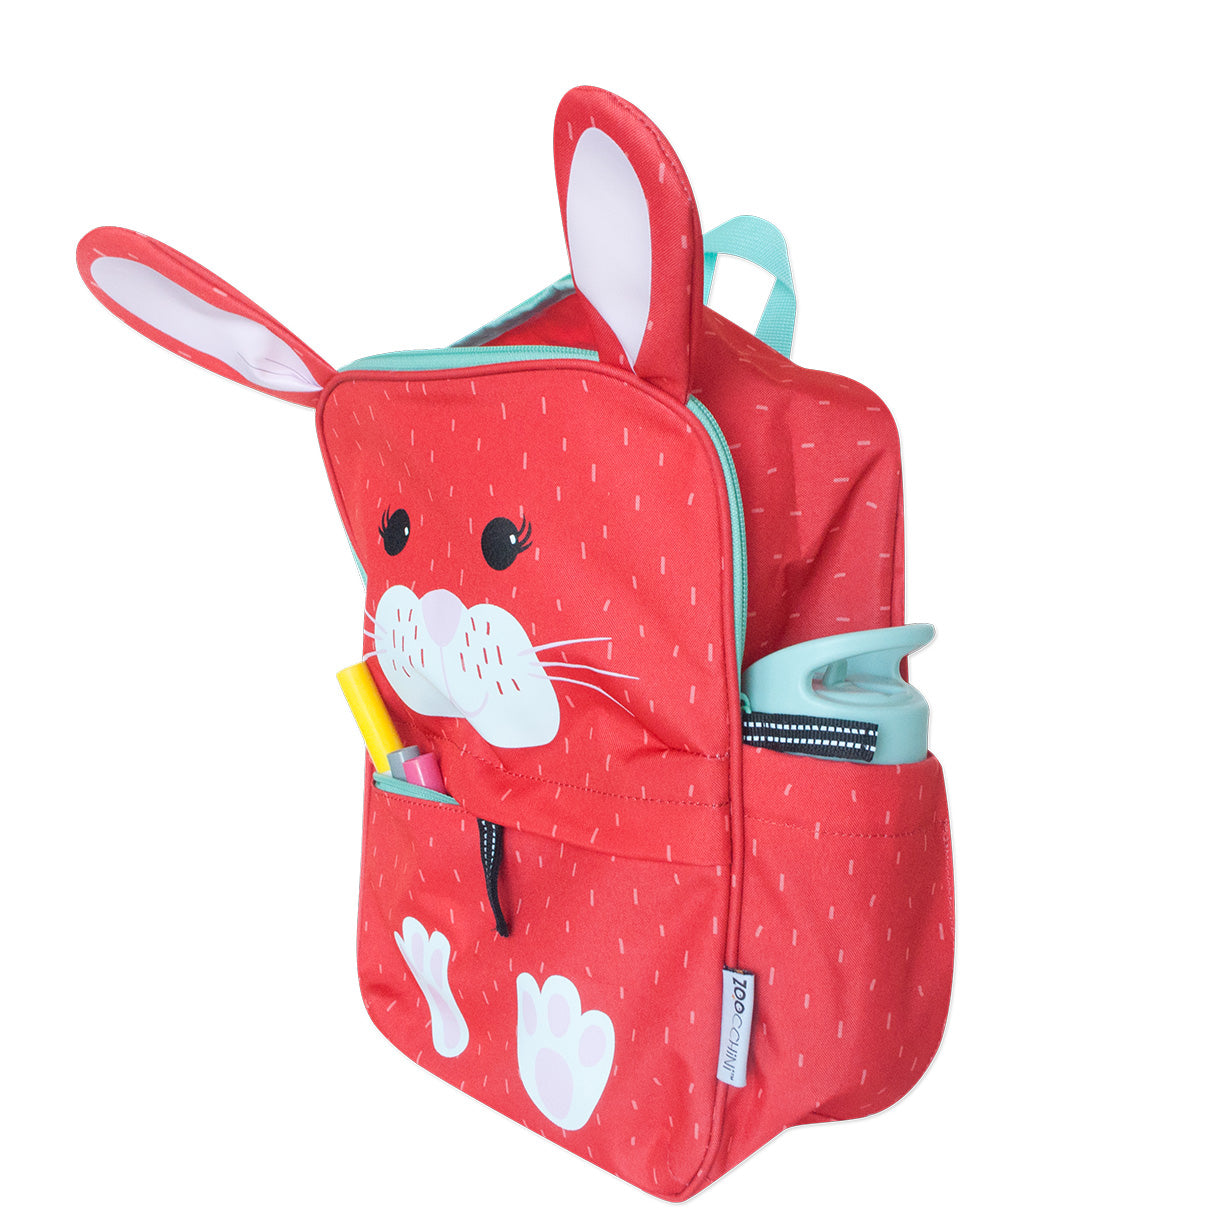 Toddler/Kids Everyday Square Backpack - Bunny Bella - the ZOOCCHINI